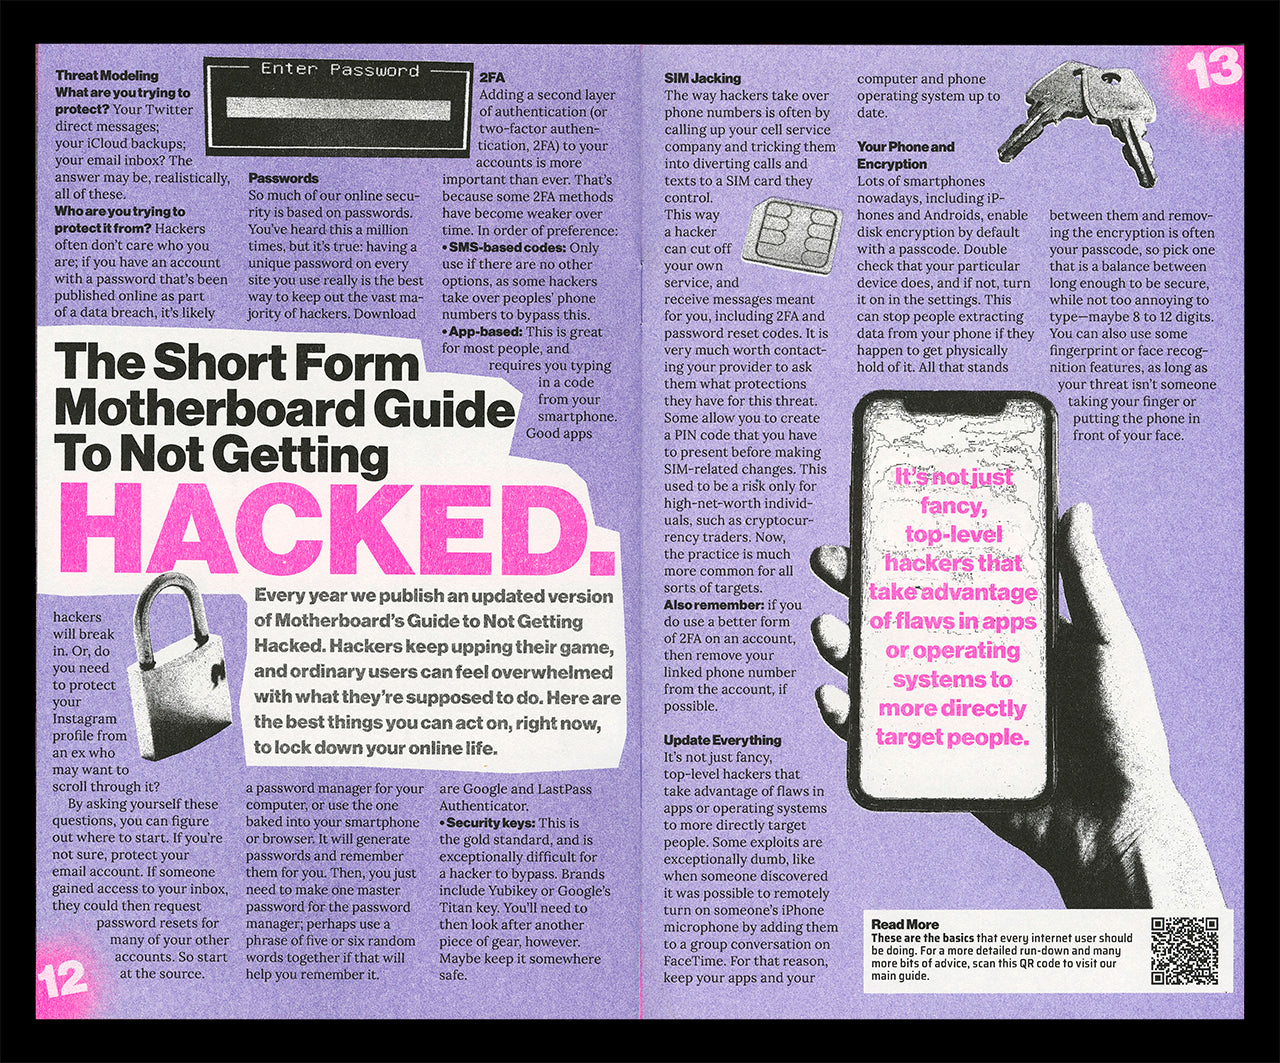 Interior spread of Motherboard's zine "The Mail" featuring an article titled "The Short Form Motherboard Guide to Not Getting Hacked"